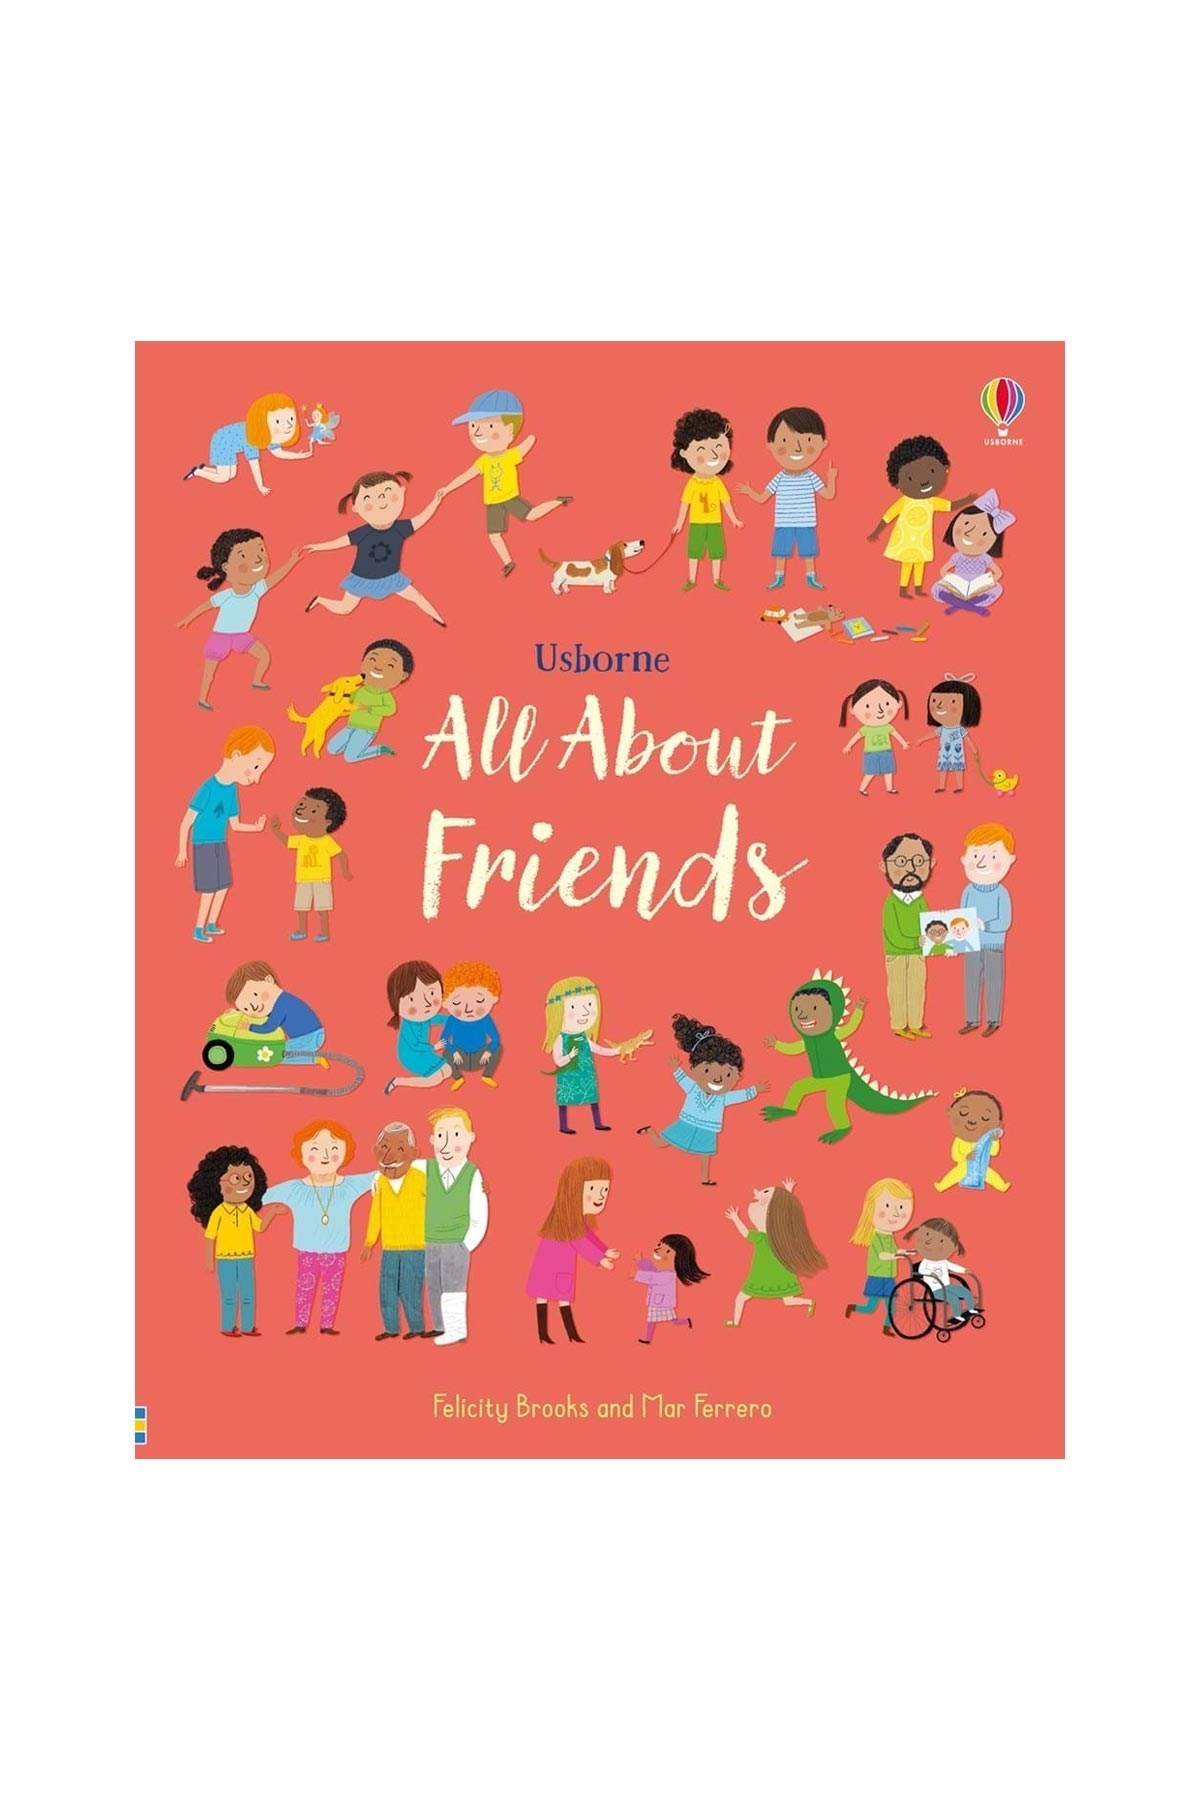 The Usborne All About Friends